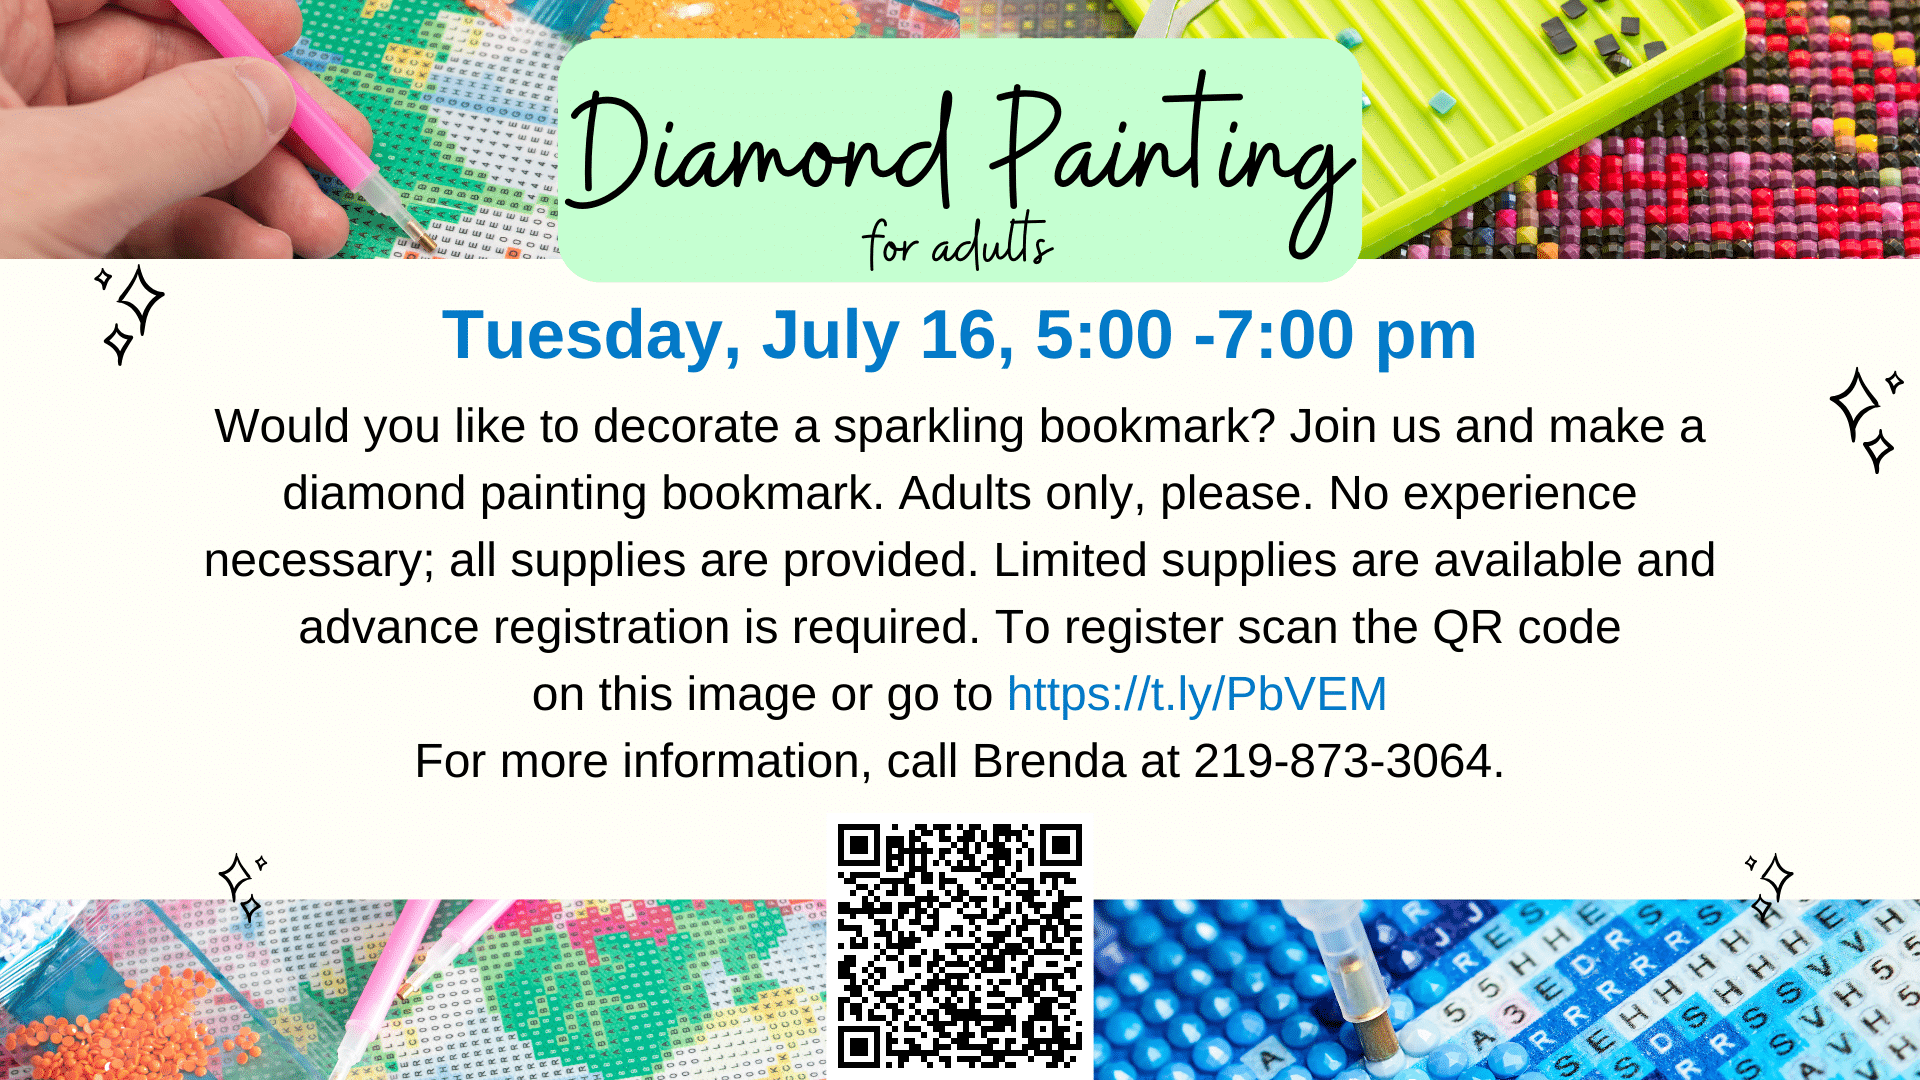 Diamond Panting for Adults, Tuesday, July 16, 5-7 pm. Please register in advance